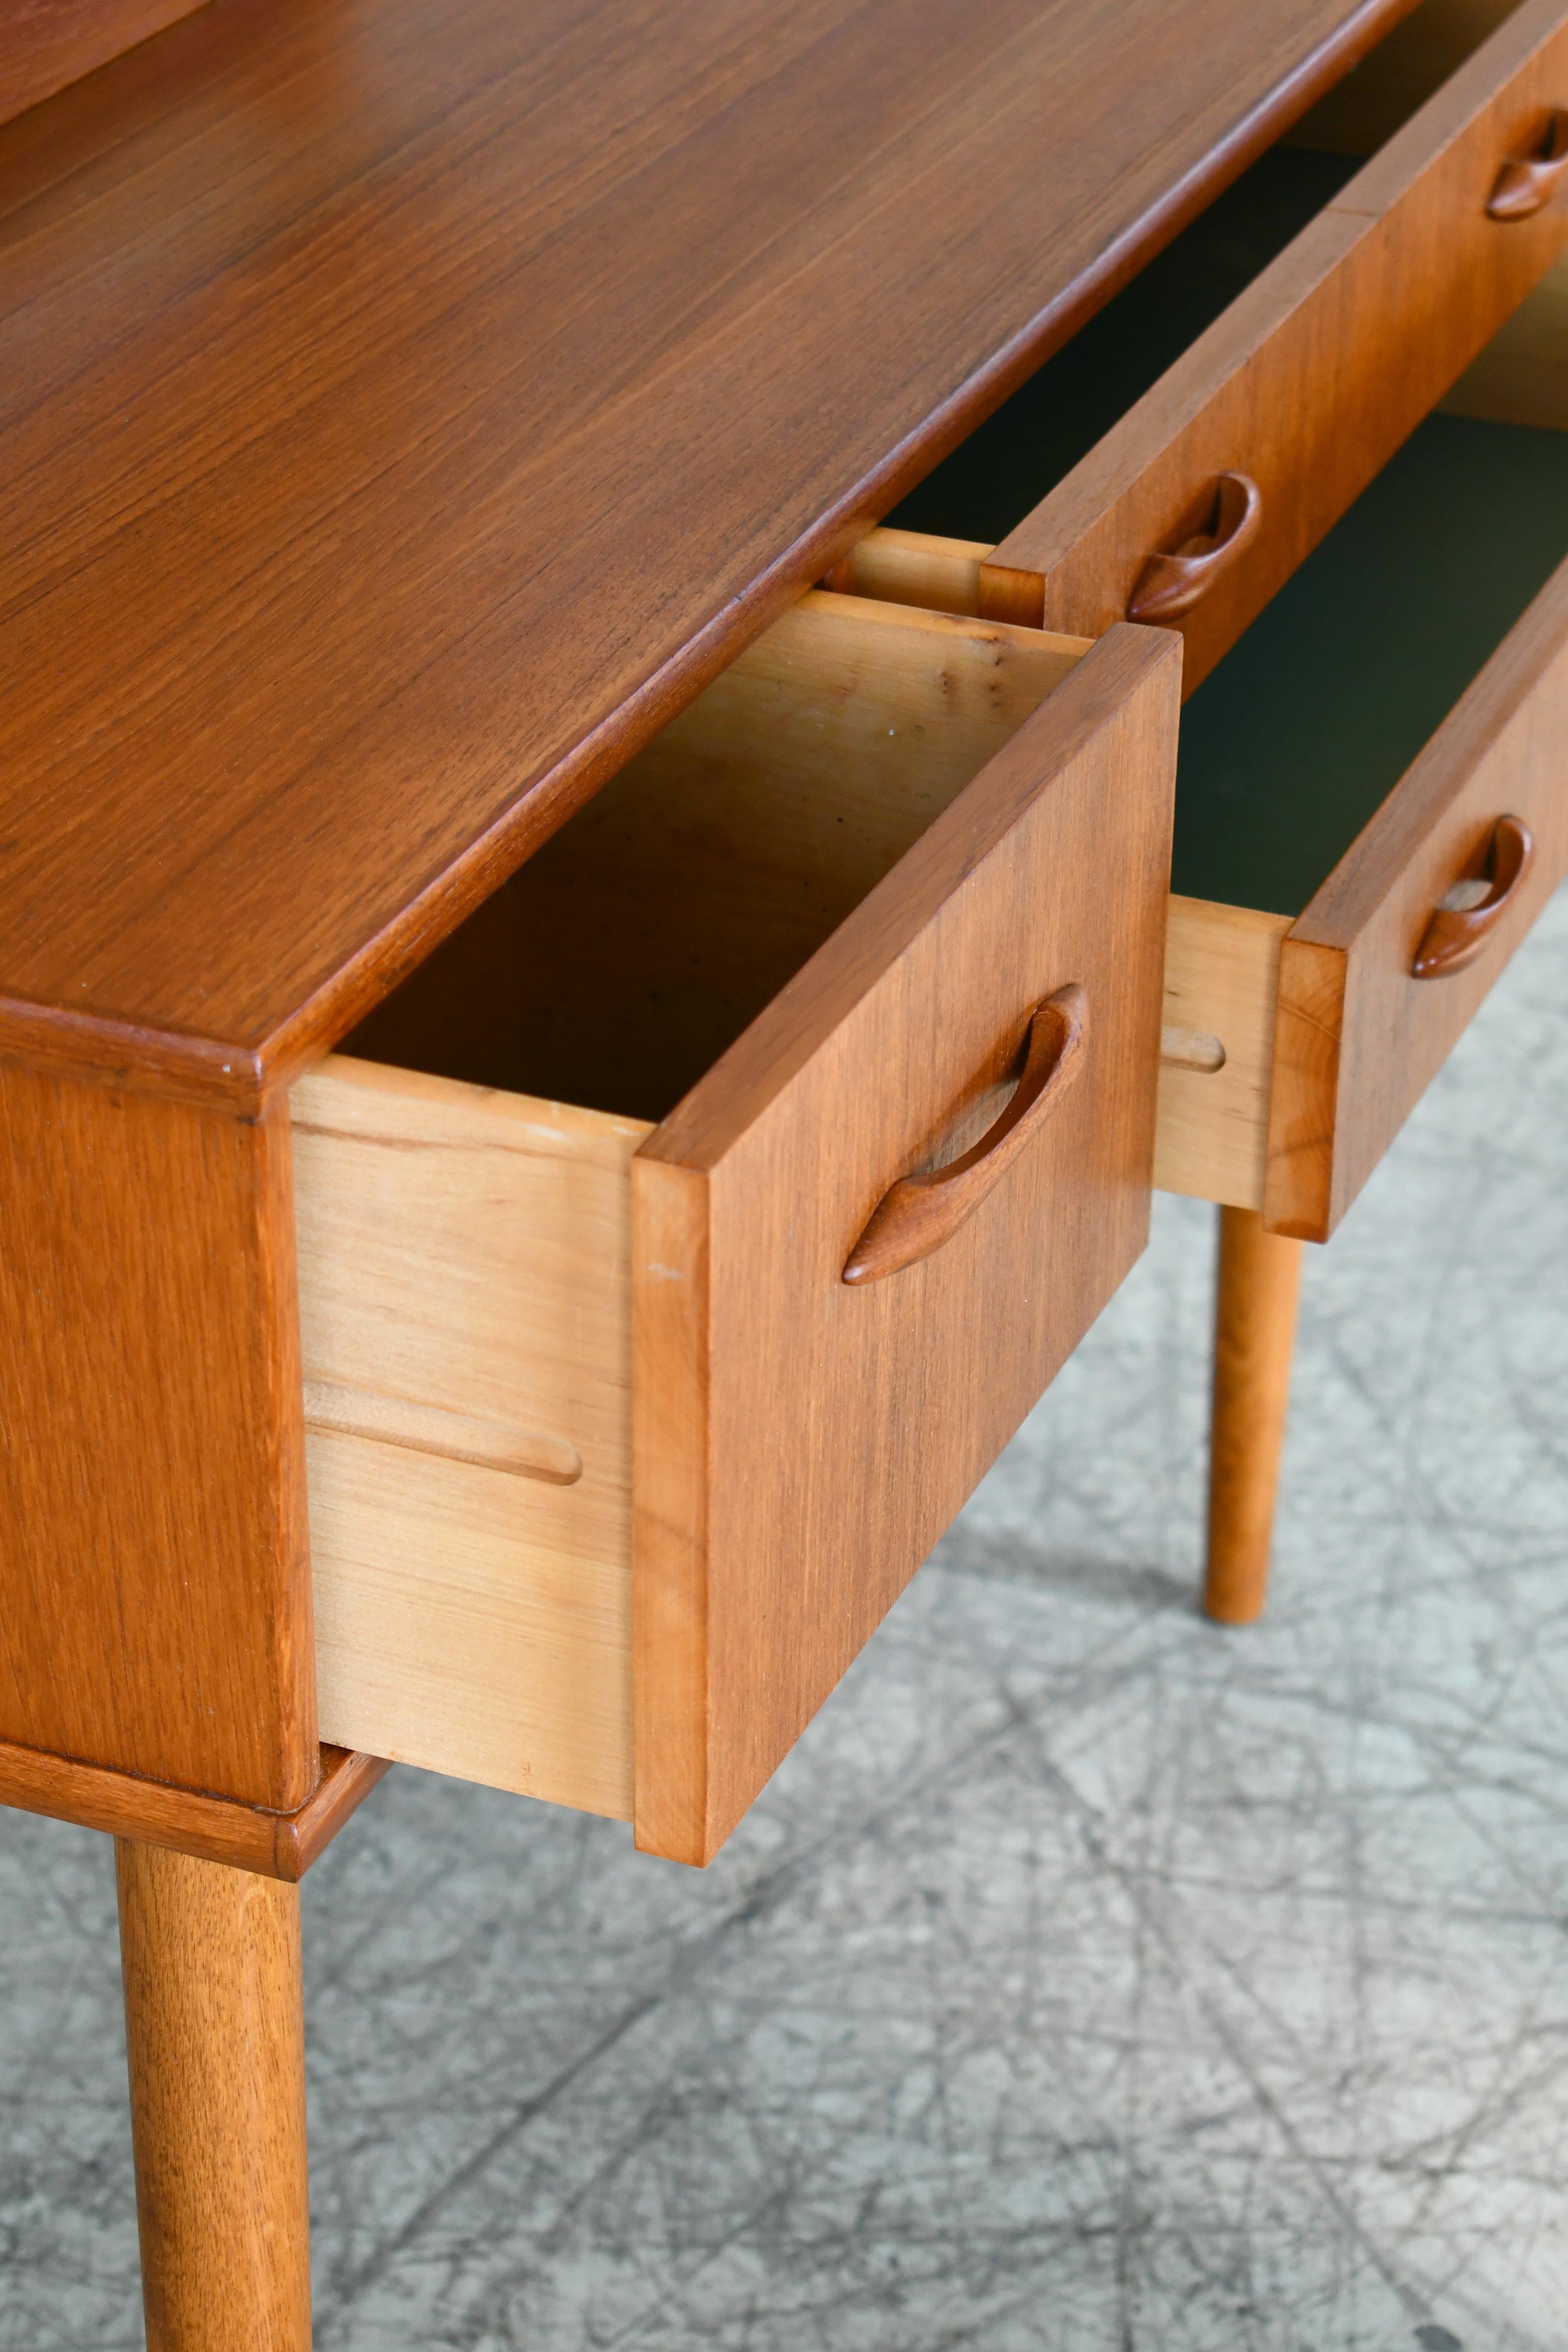 Mid-20th Century Danish Midcentury Vanity or Dressing Table in Teak with Mirror and Drawers